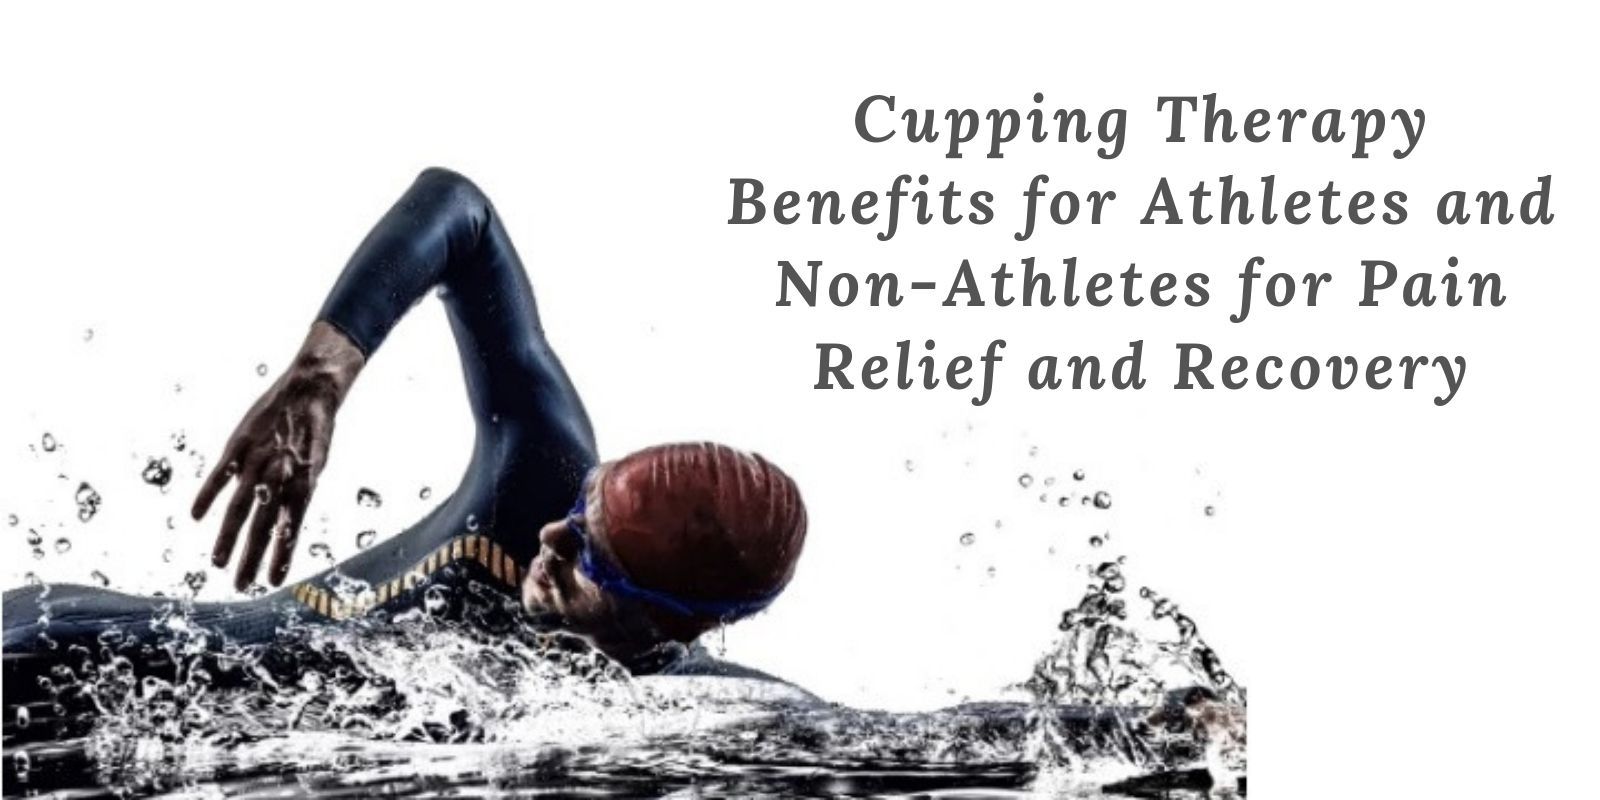 Cupping Therapy Benefits for Athletes and Non-Athletes for Pain Relief and Recovery